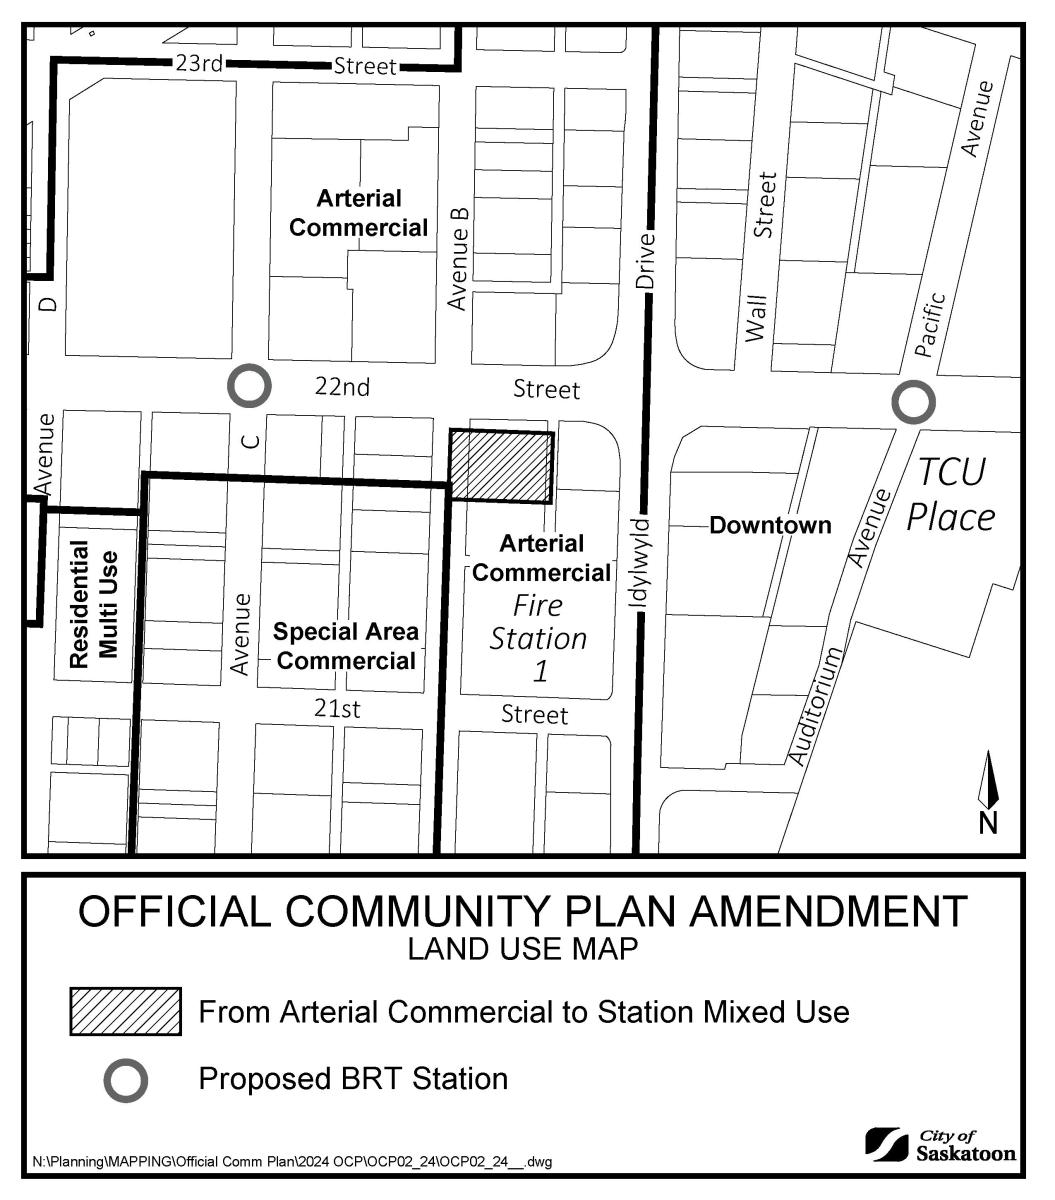 Map showing affected site on Avenue B South and proposed BRT station at 22nd Street and Avenue C